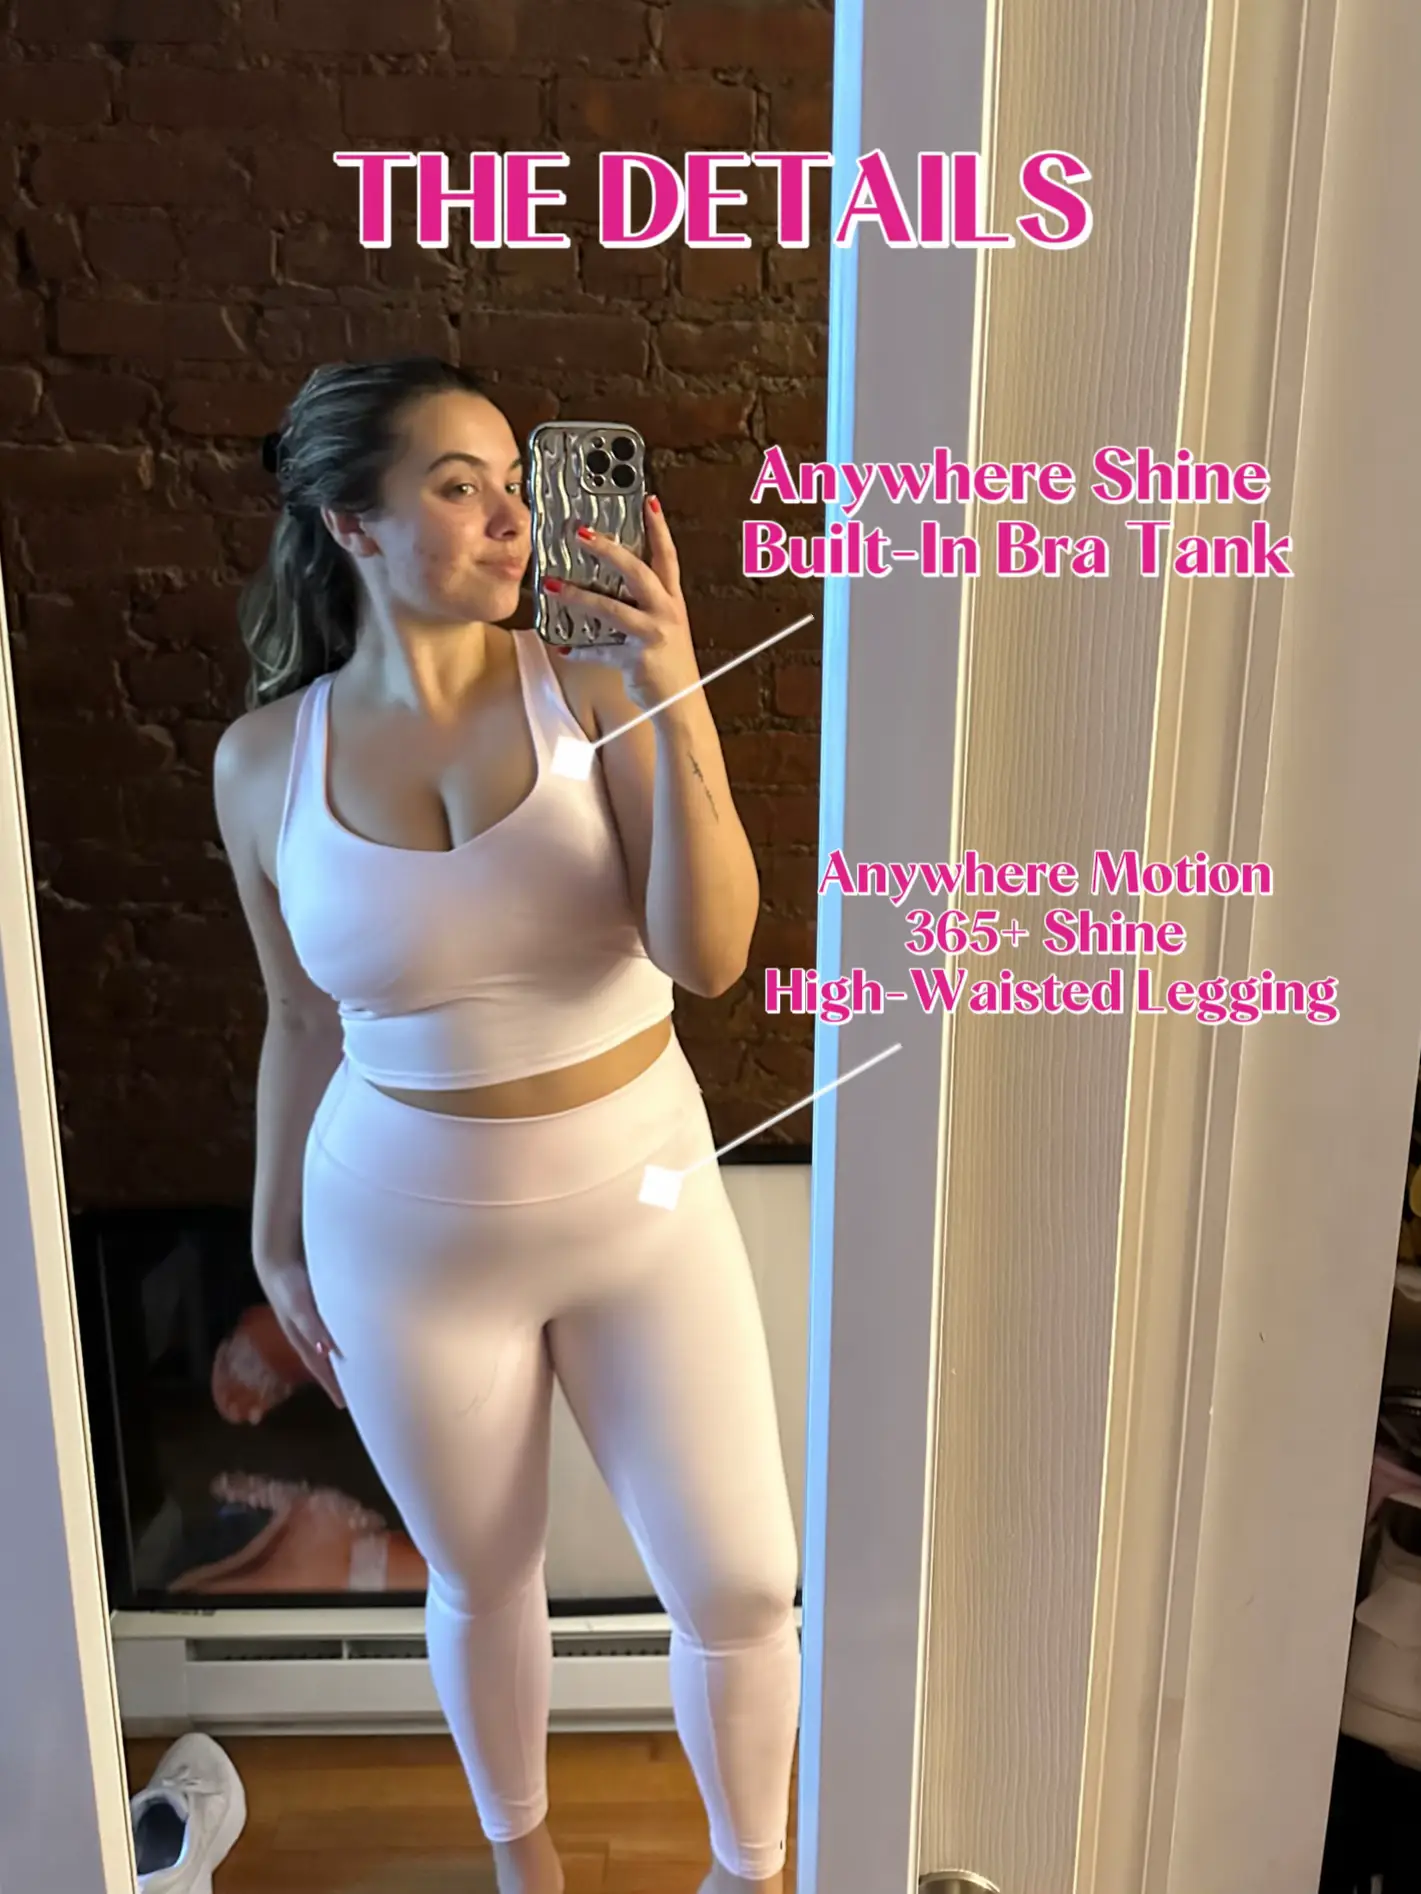 Fabletics Khloe Kardashian pink set review 💖, Gallery posted by KR